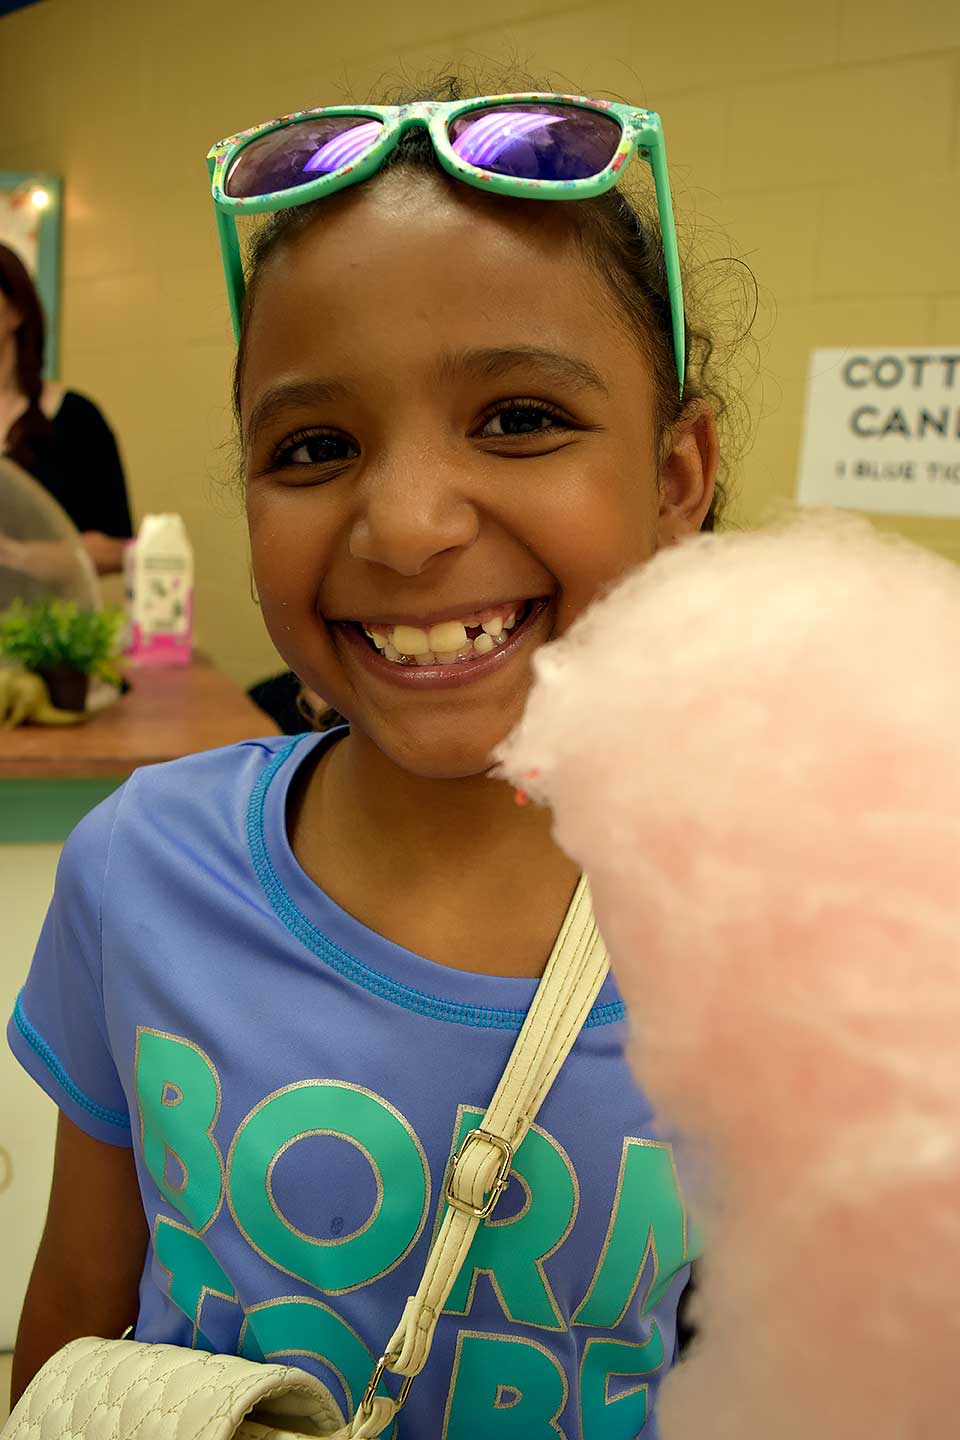 Girl Eating Cotton Candy at Member Celebration 2019